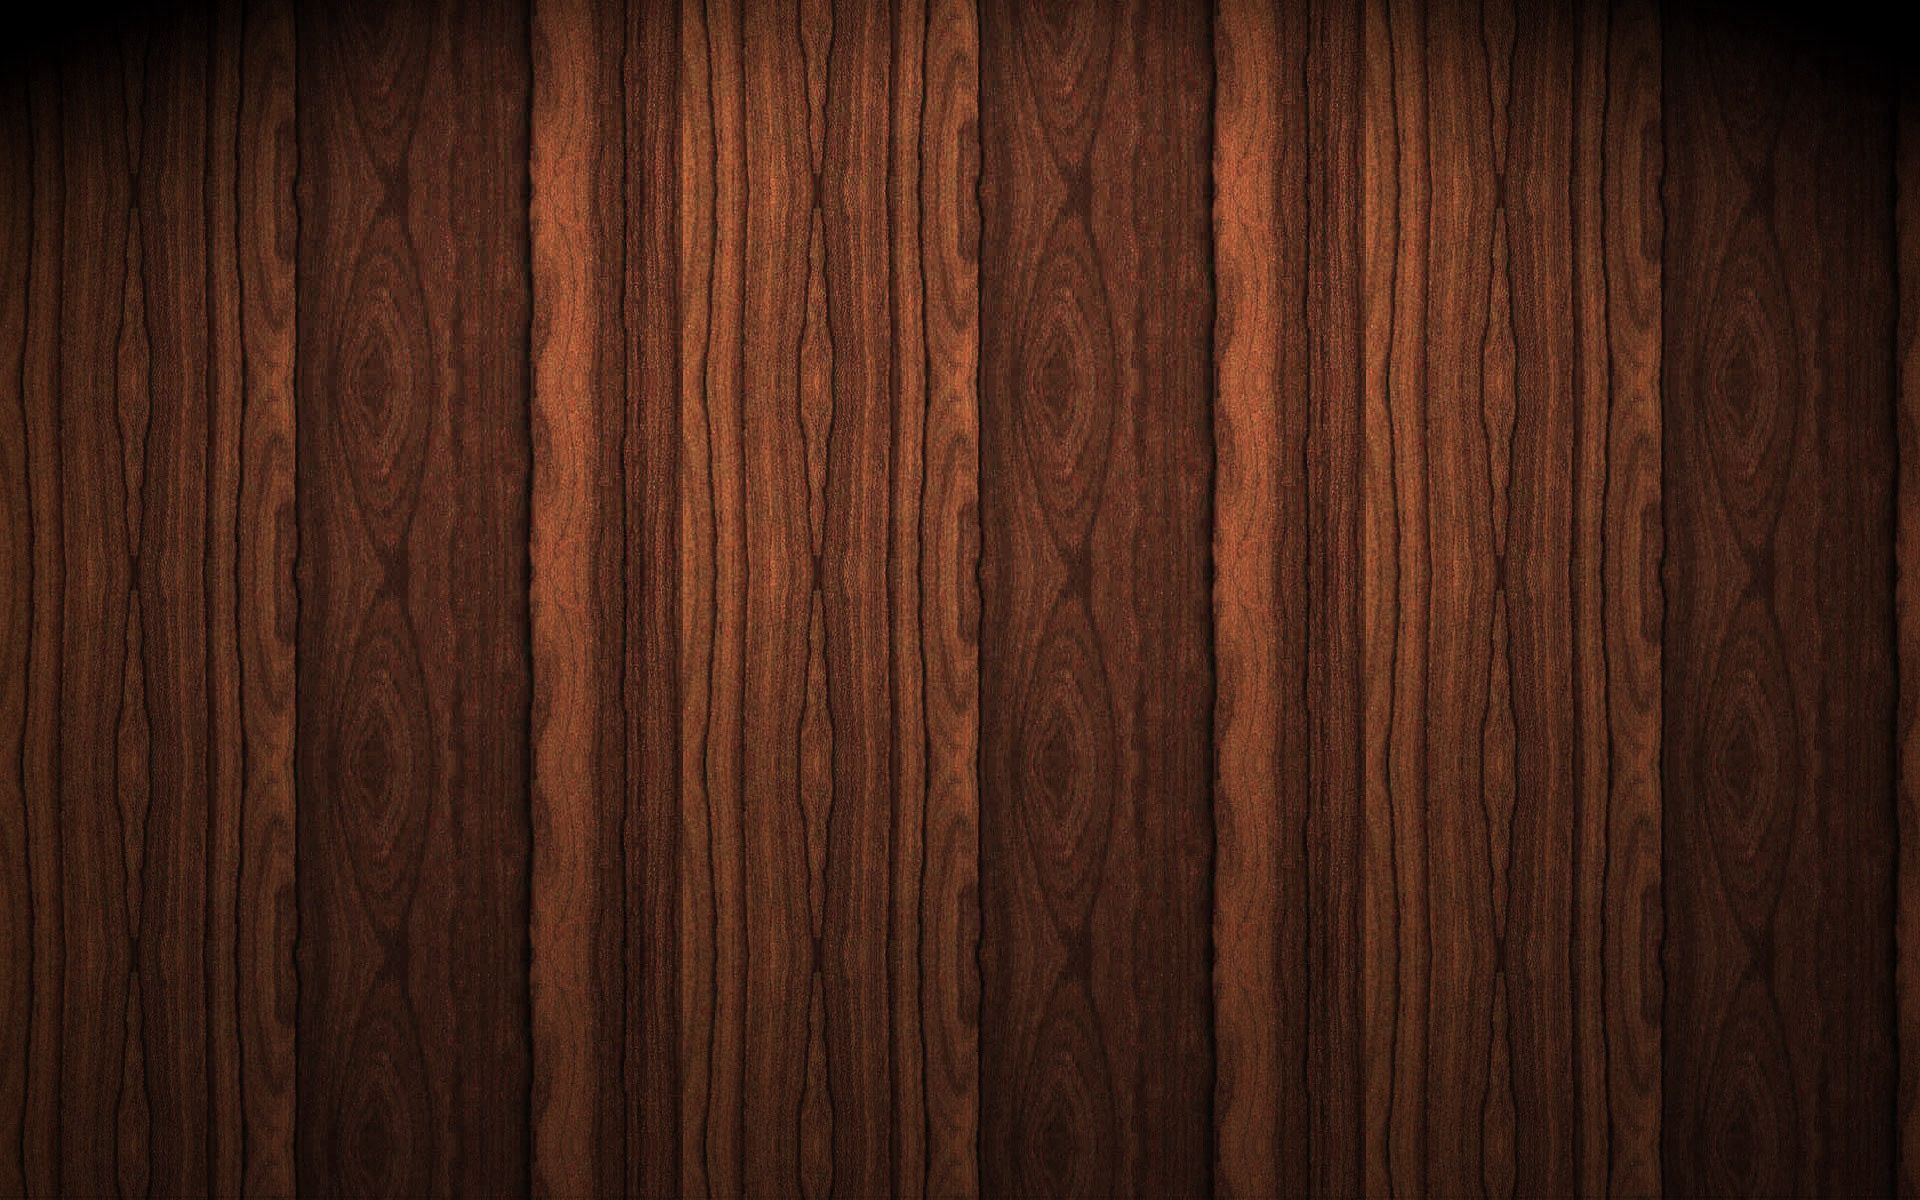 wooden, textures, light, wood, texture, surface, light coloured, planks, board